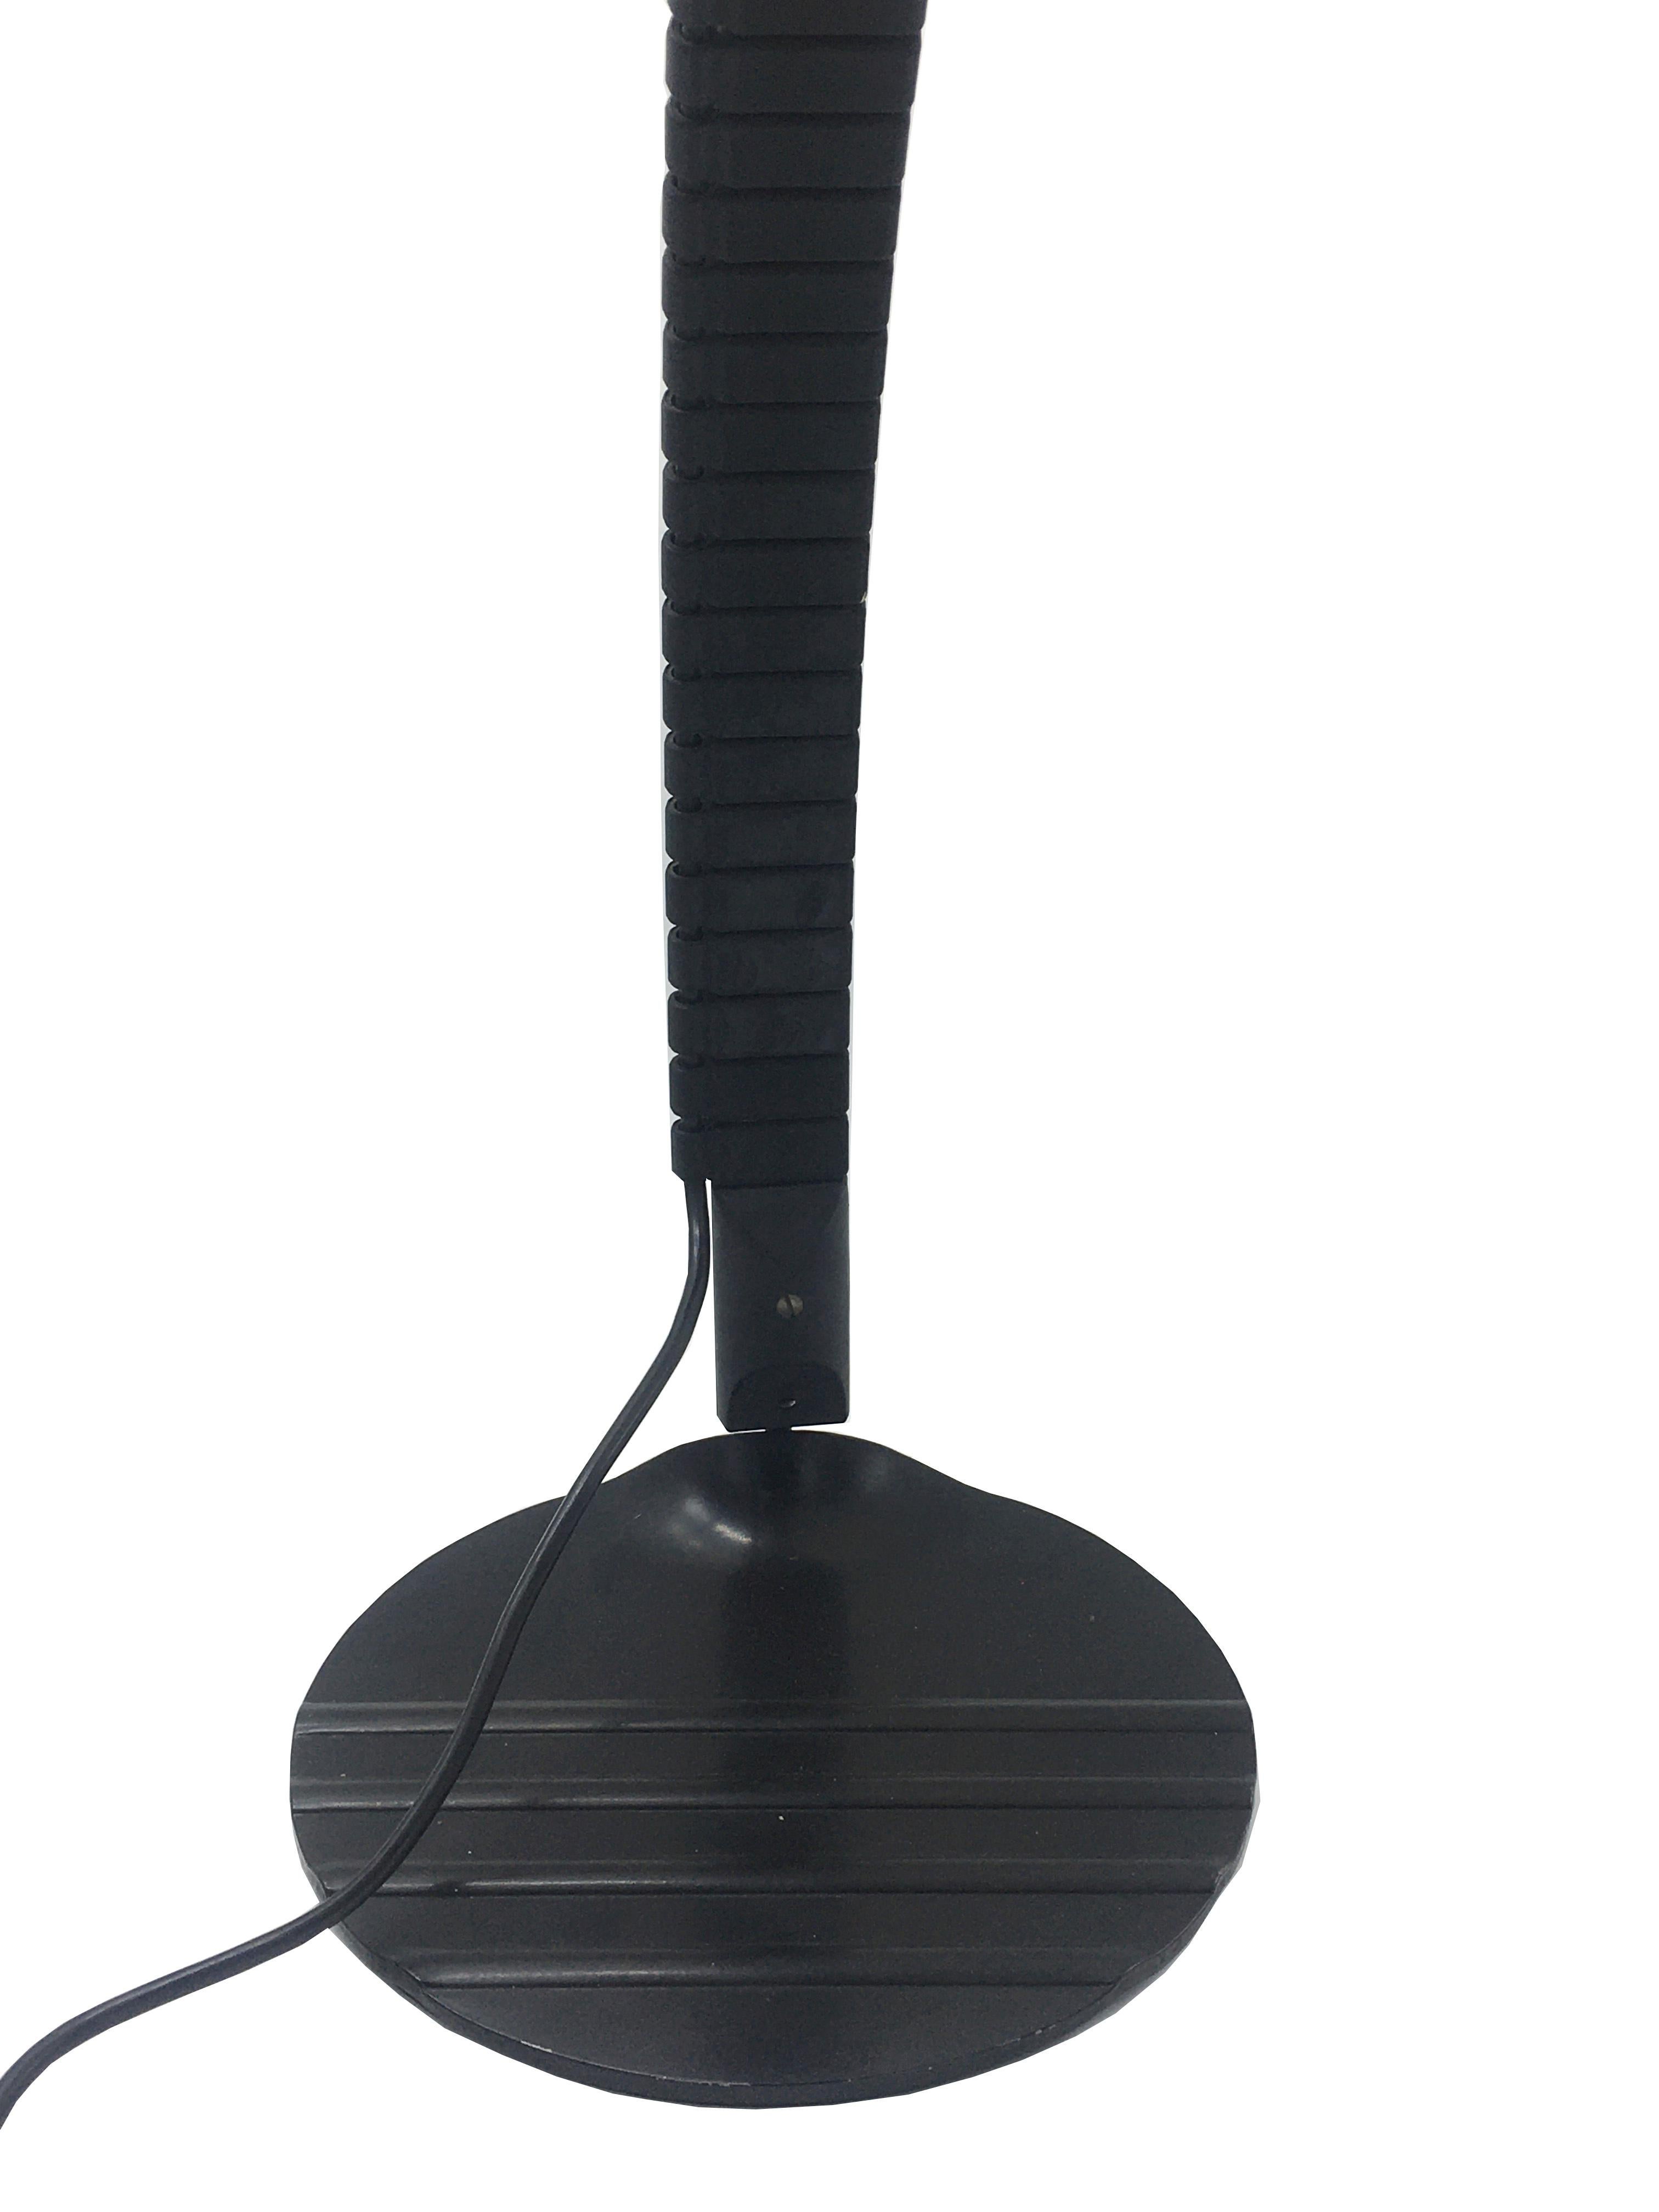 Late 20th Century Black Table Lamp, Model 660 by Elio Martinelli for Martinelli Luce